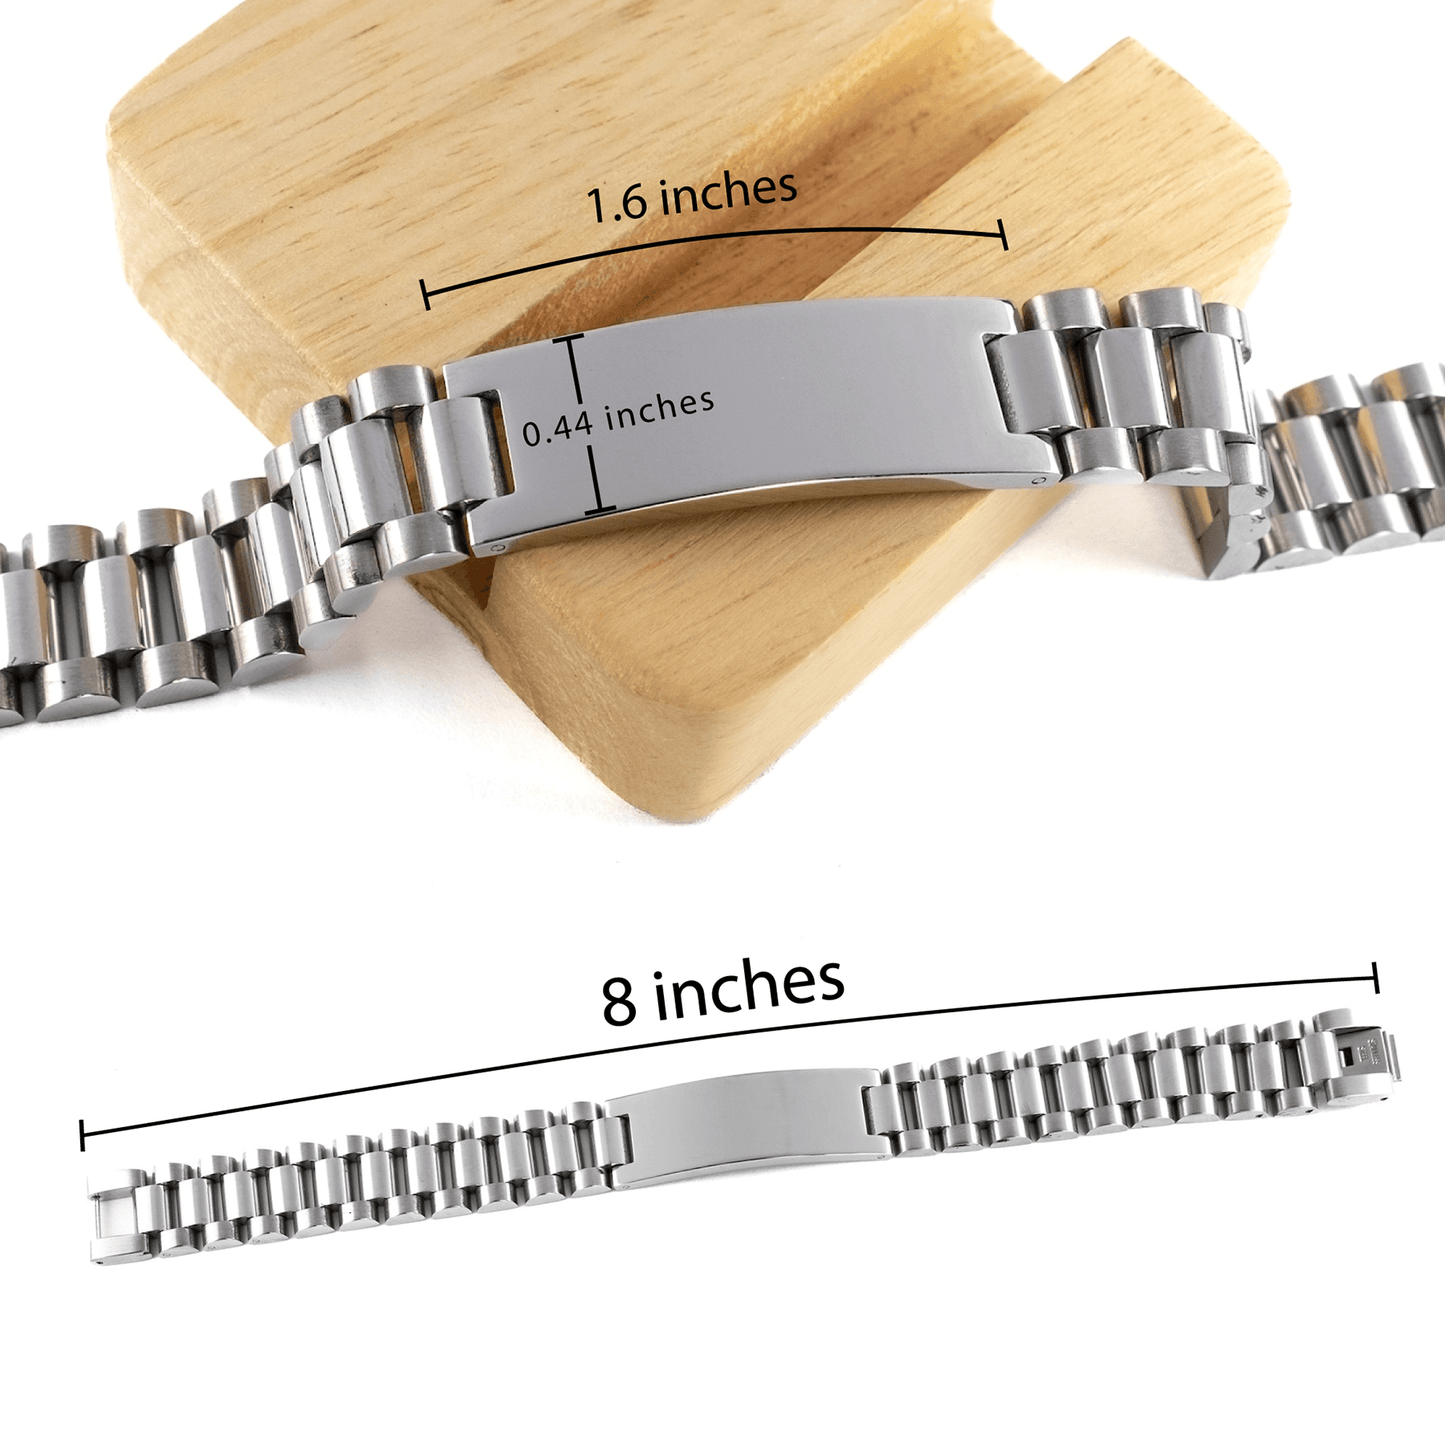 Massage Therapist Ladder Stainless Steel Engraved Bracelet - Thanks for being who you are - Birthday Christmas Jewelry Gifts Coworkers Colleague Boss - Mallard Moon Gift Shop